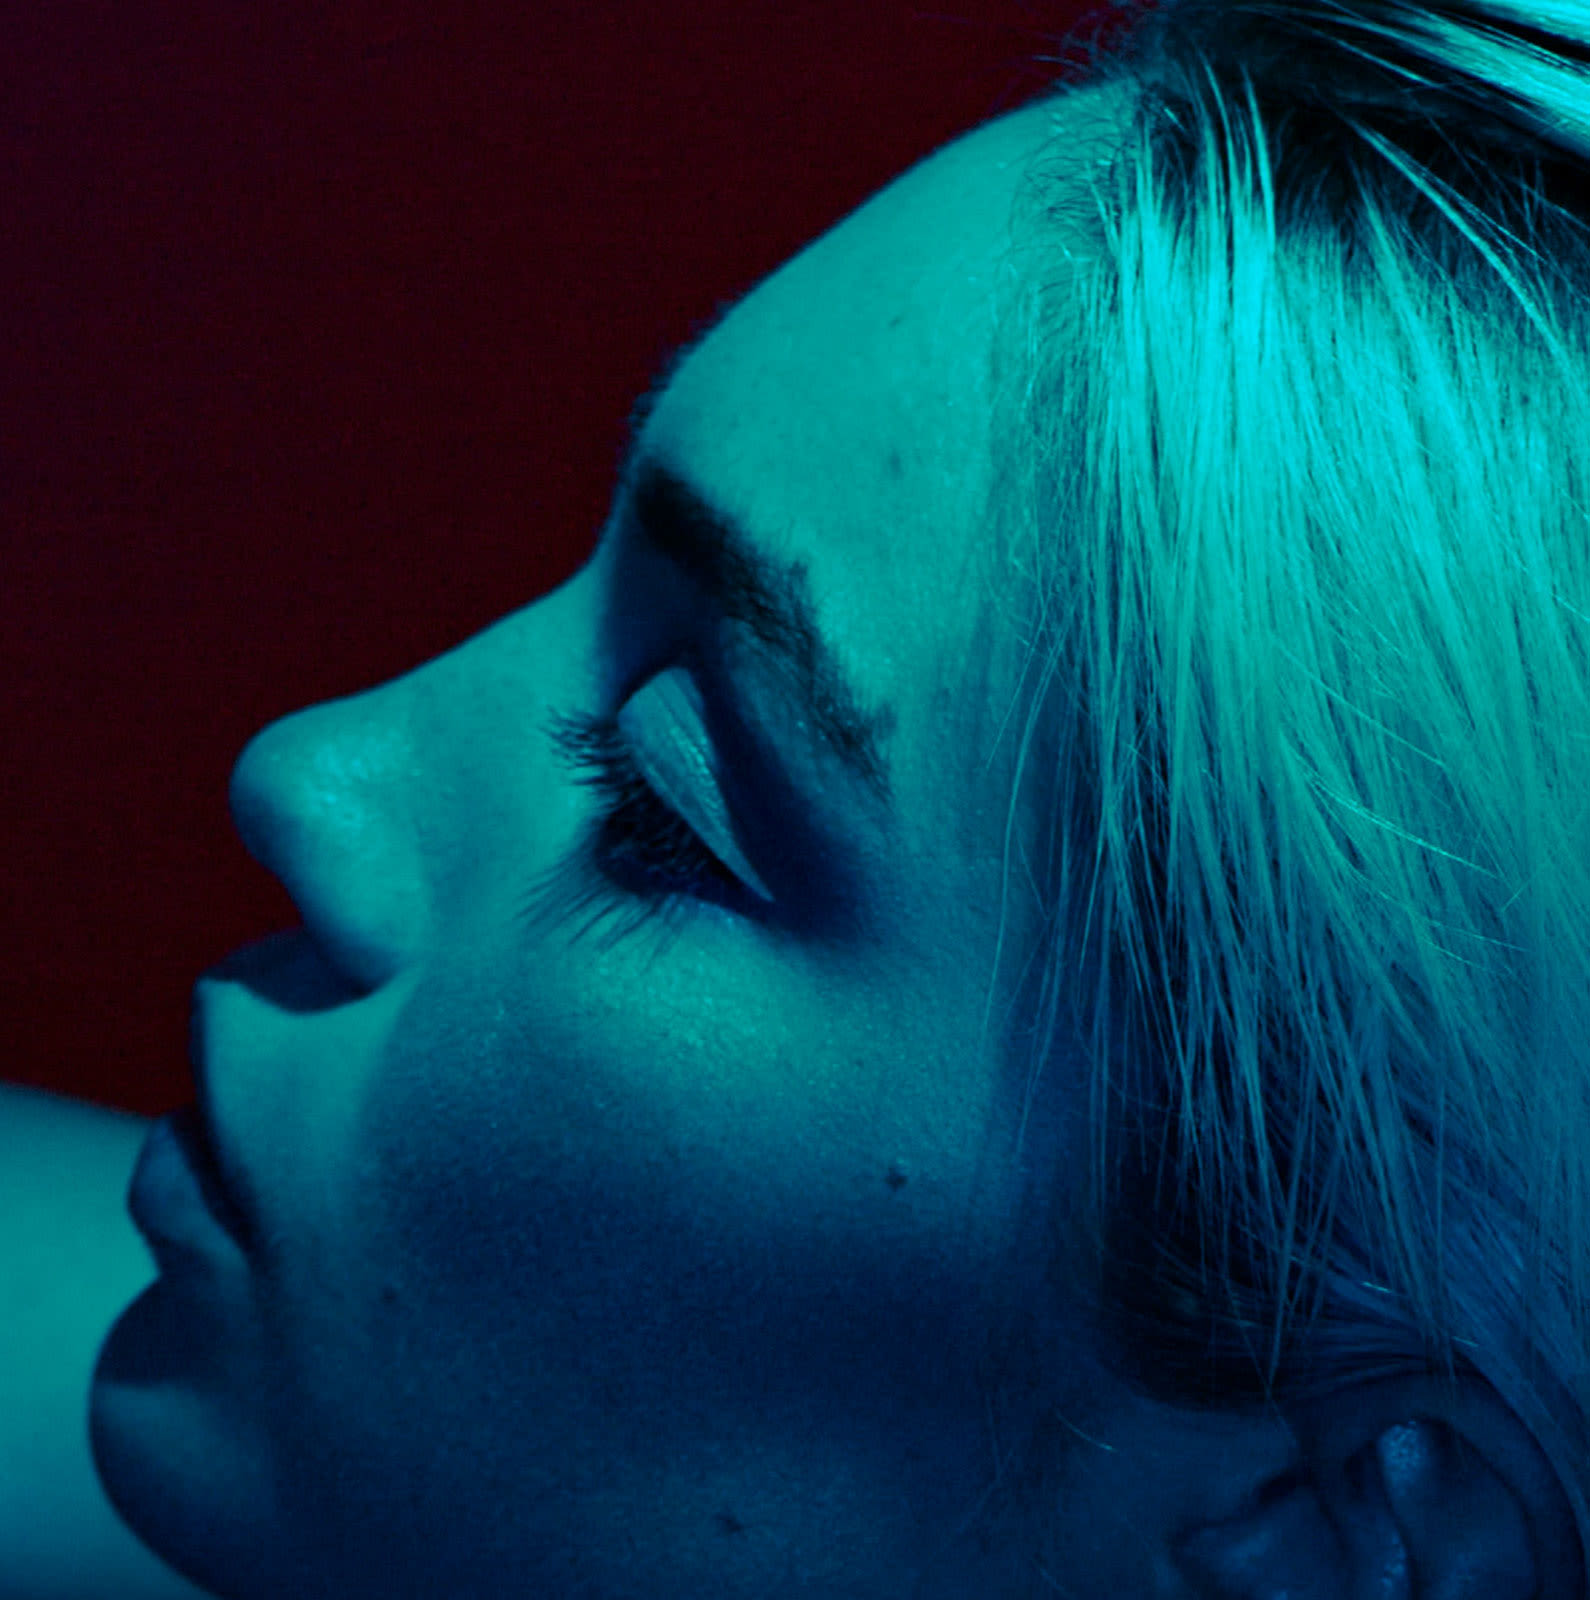 Woman's profile in blue tinted light